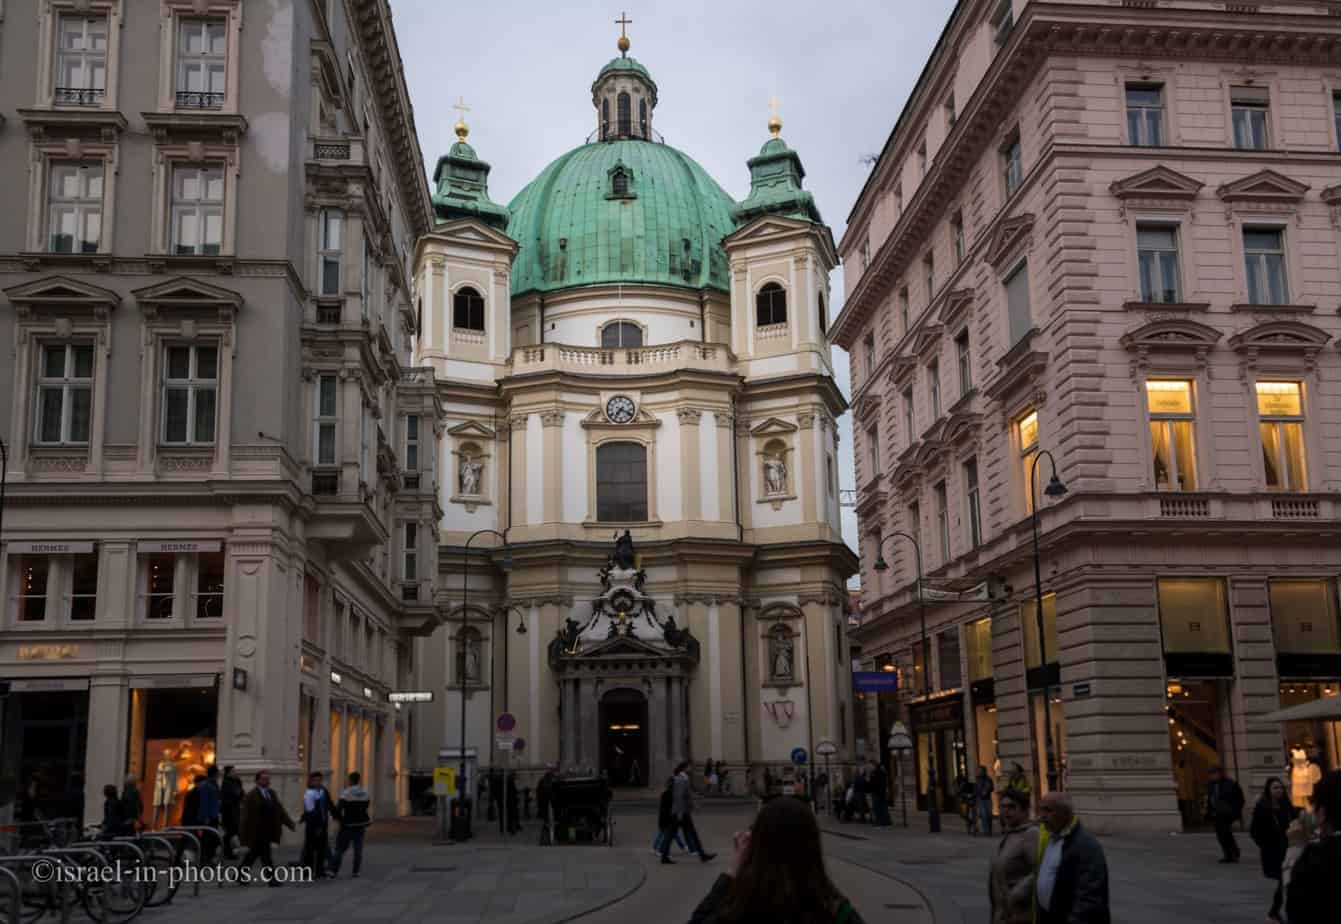 St. Peter's Church. St. Peter's Church also known as Peterskirche in Vienna, Austria’s capital